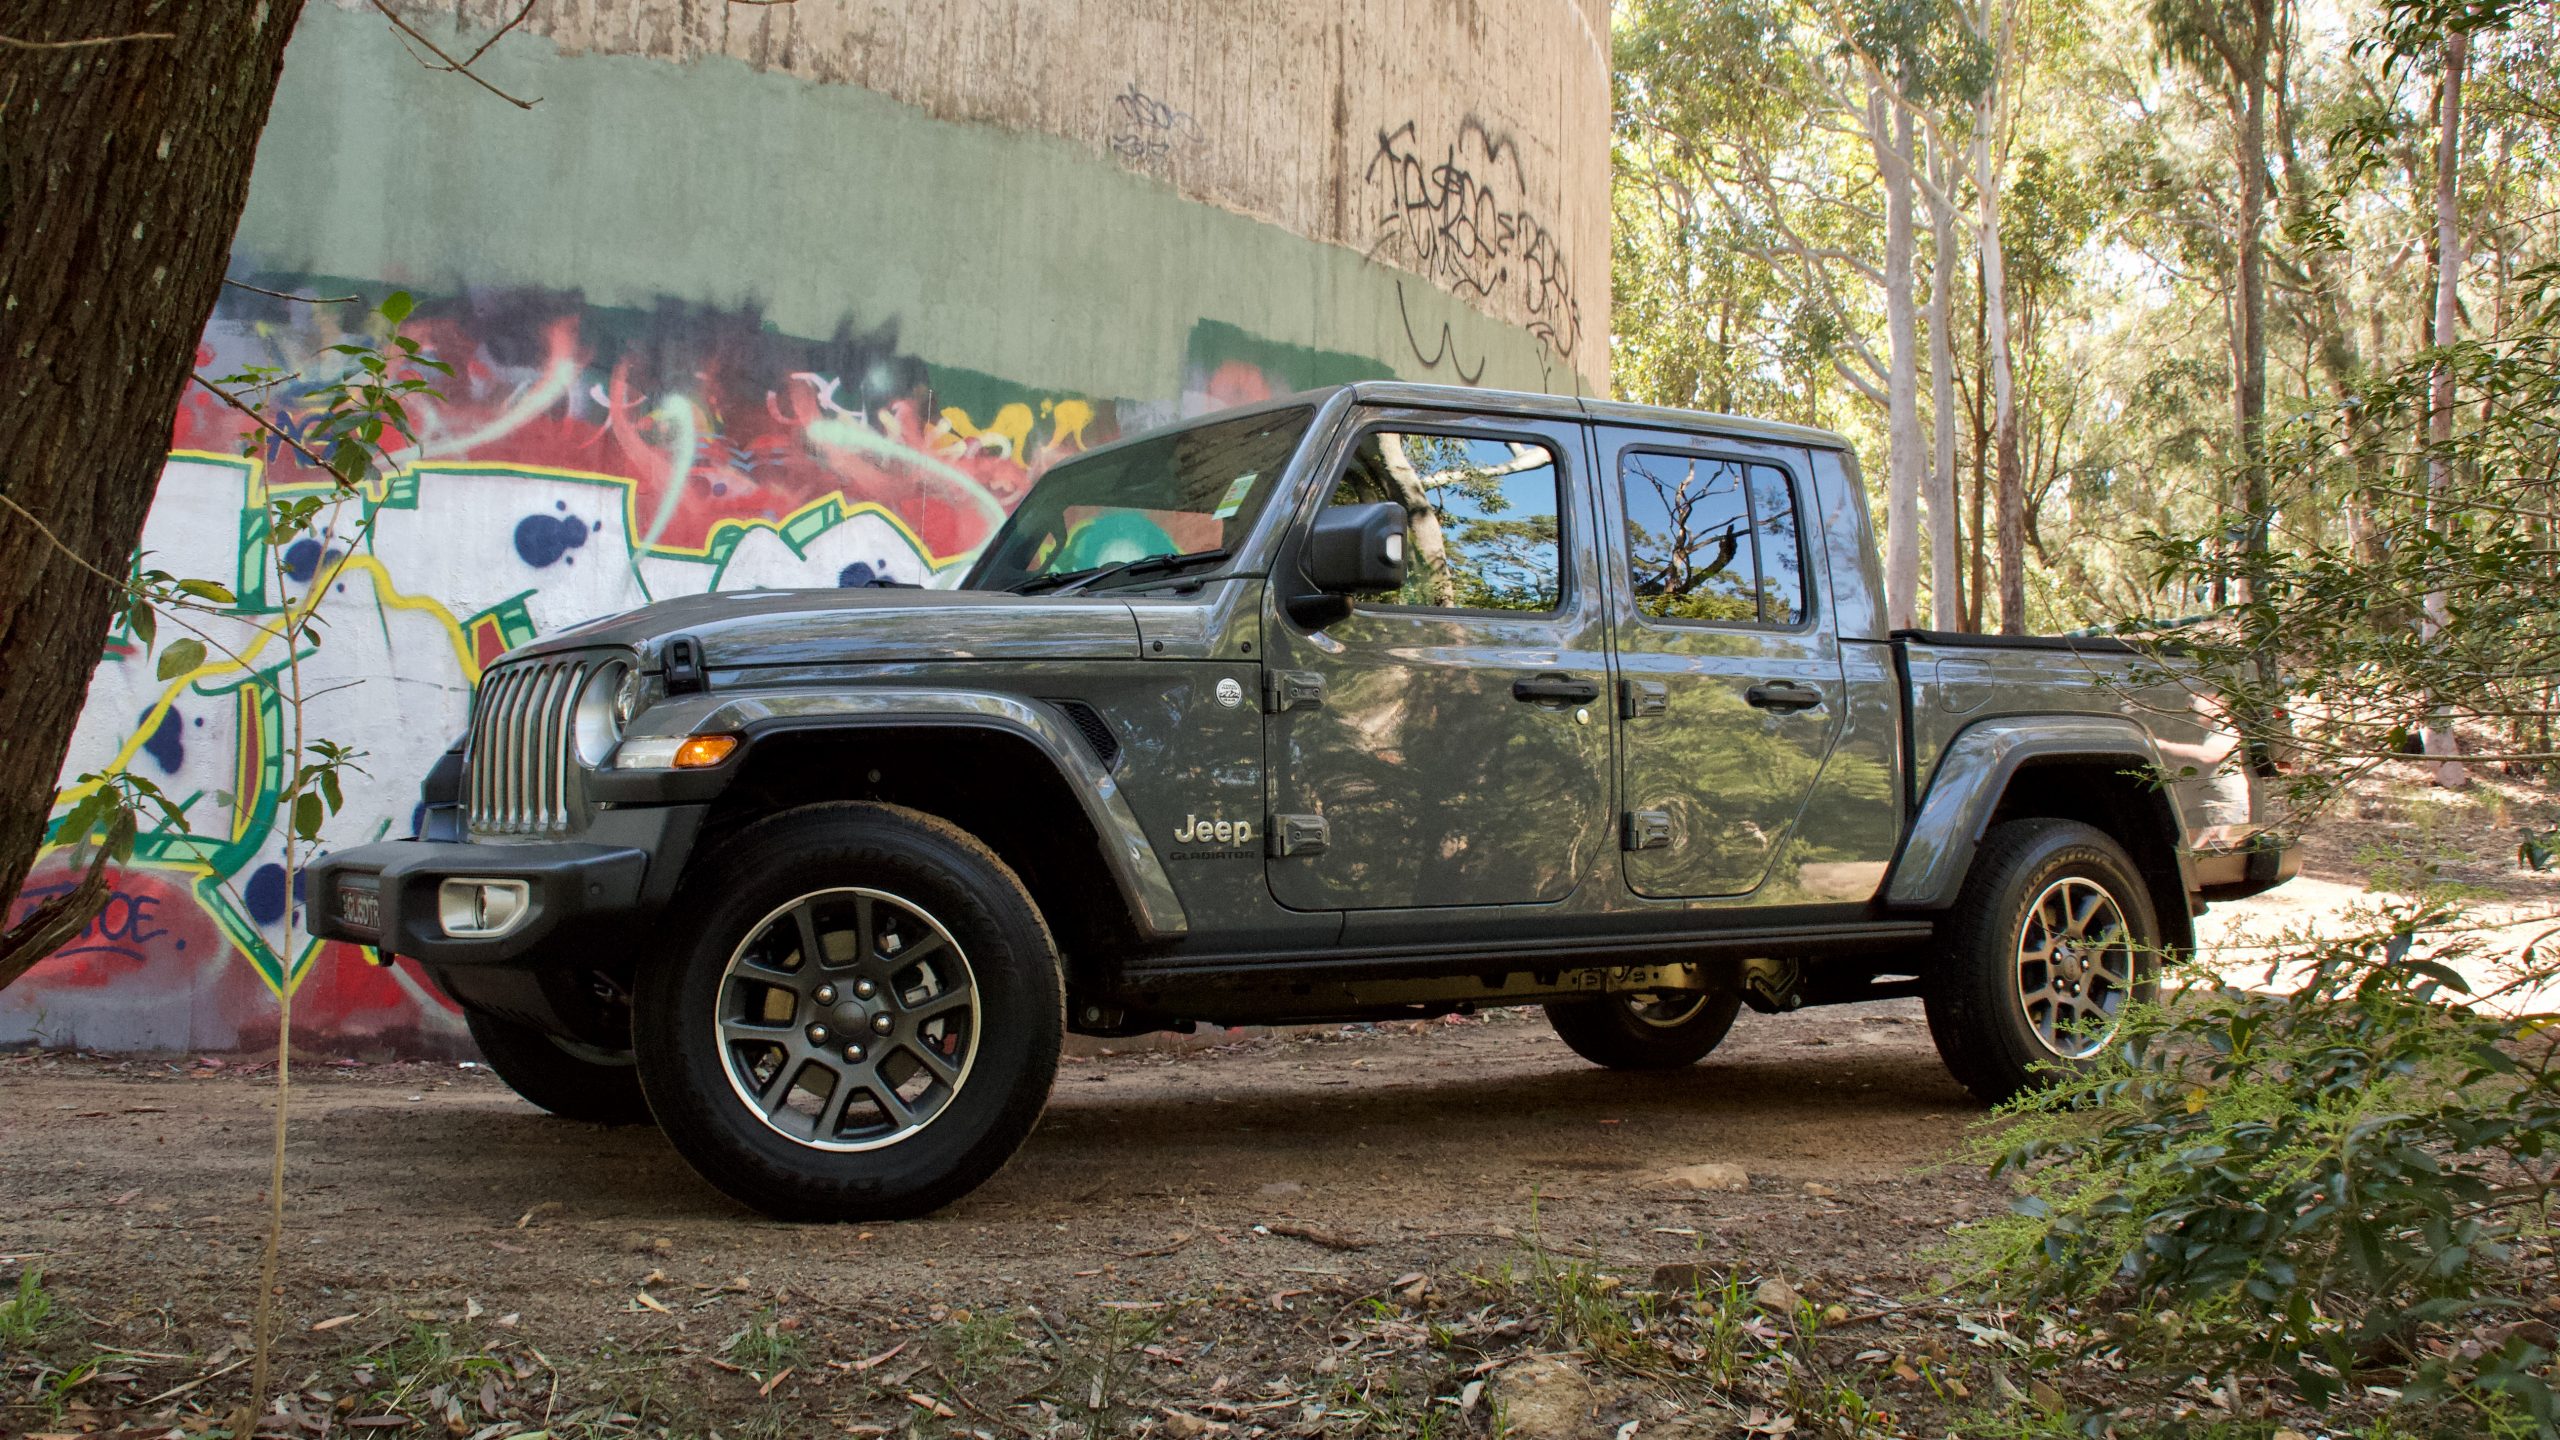 Jeep Gladiator Gravity Wallpapers